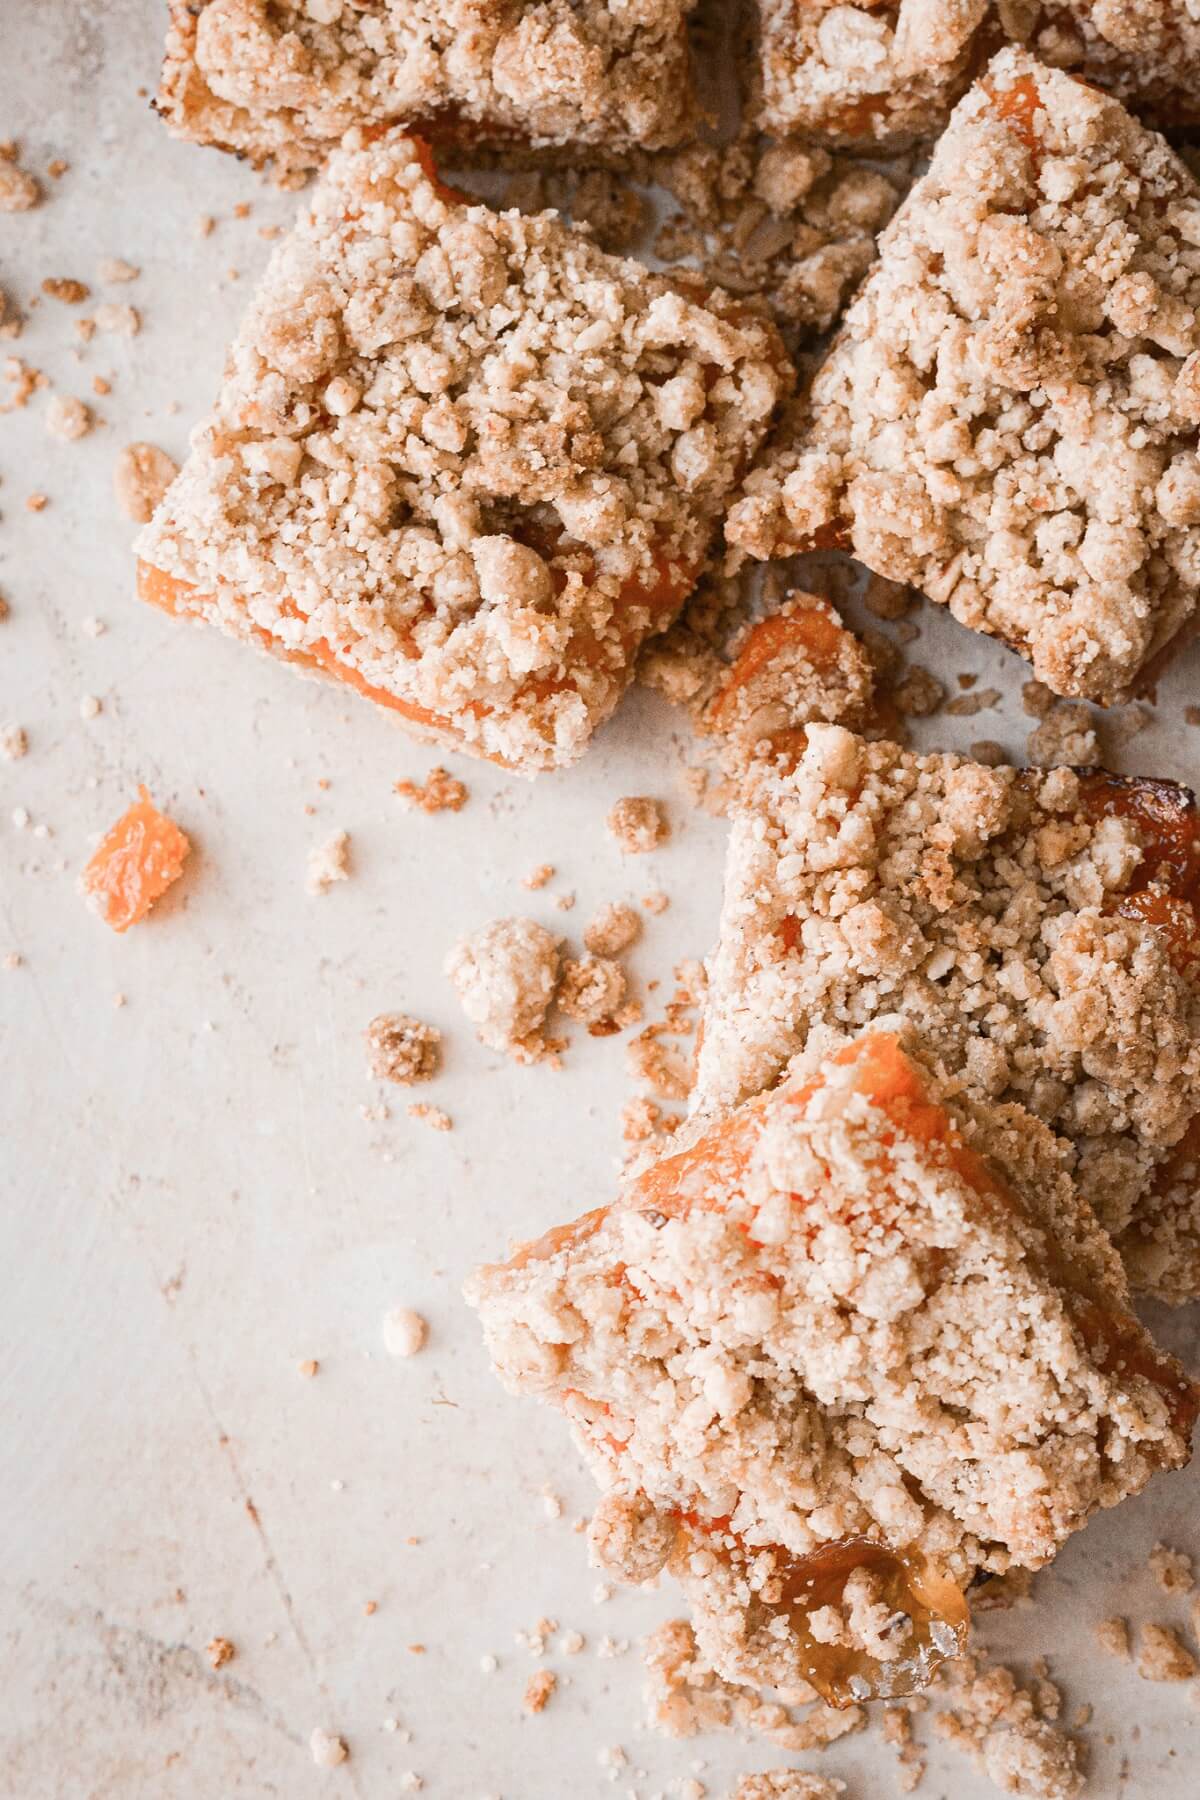 Apricot almond oat bars cut into squares.